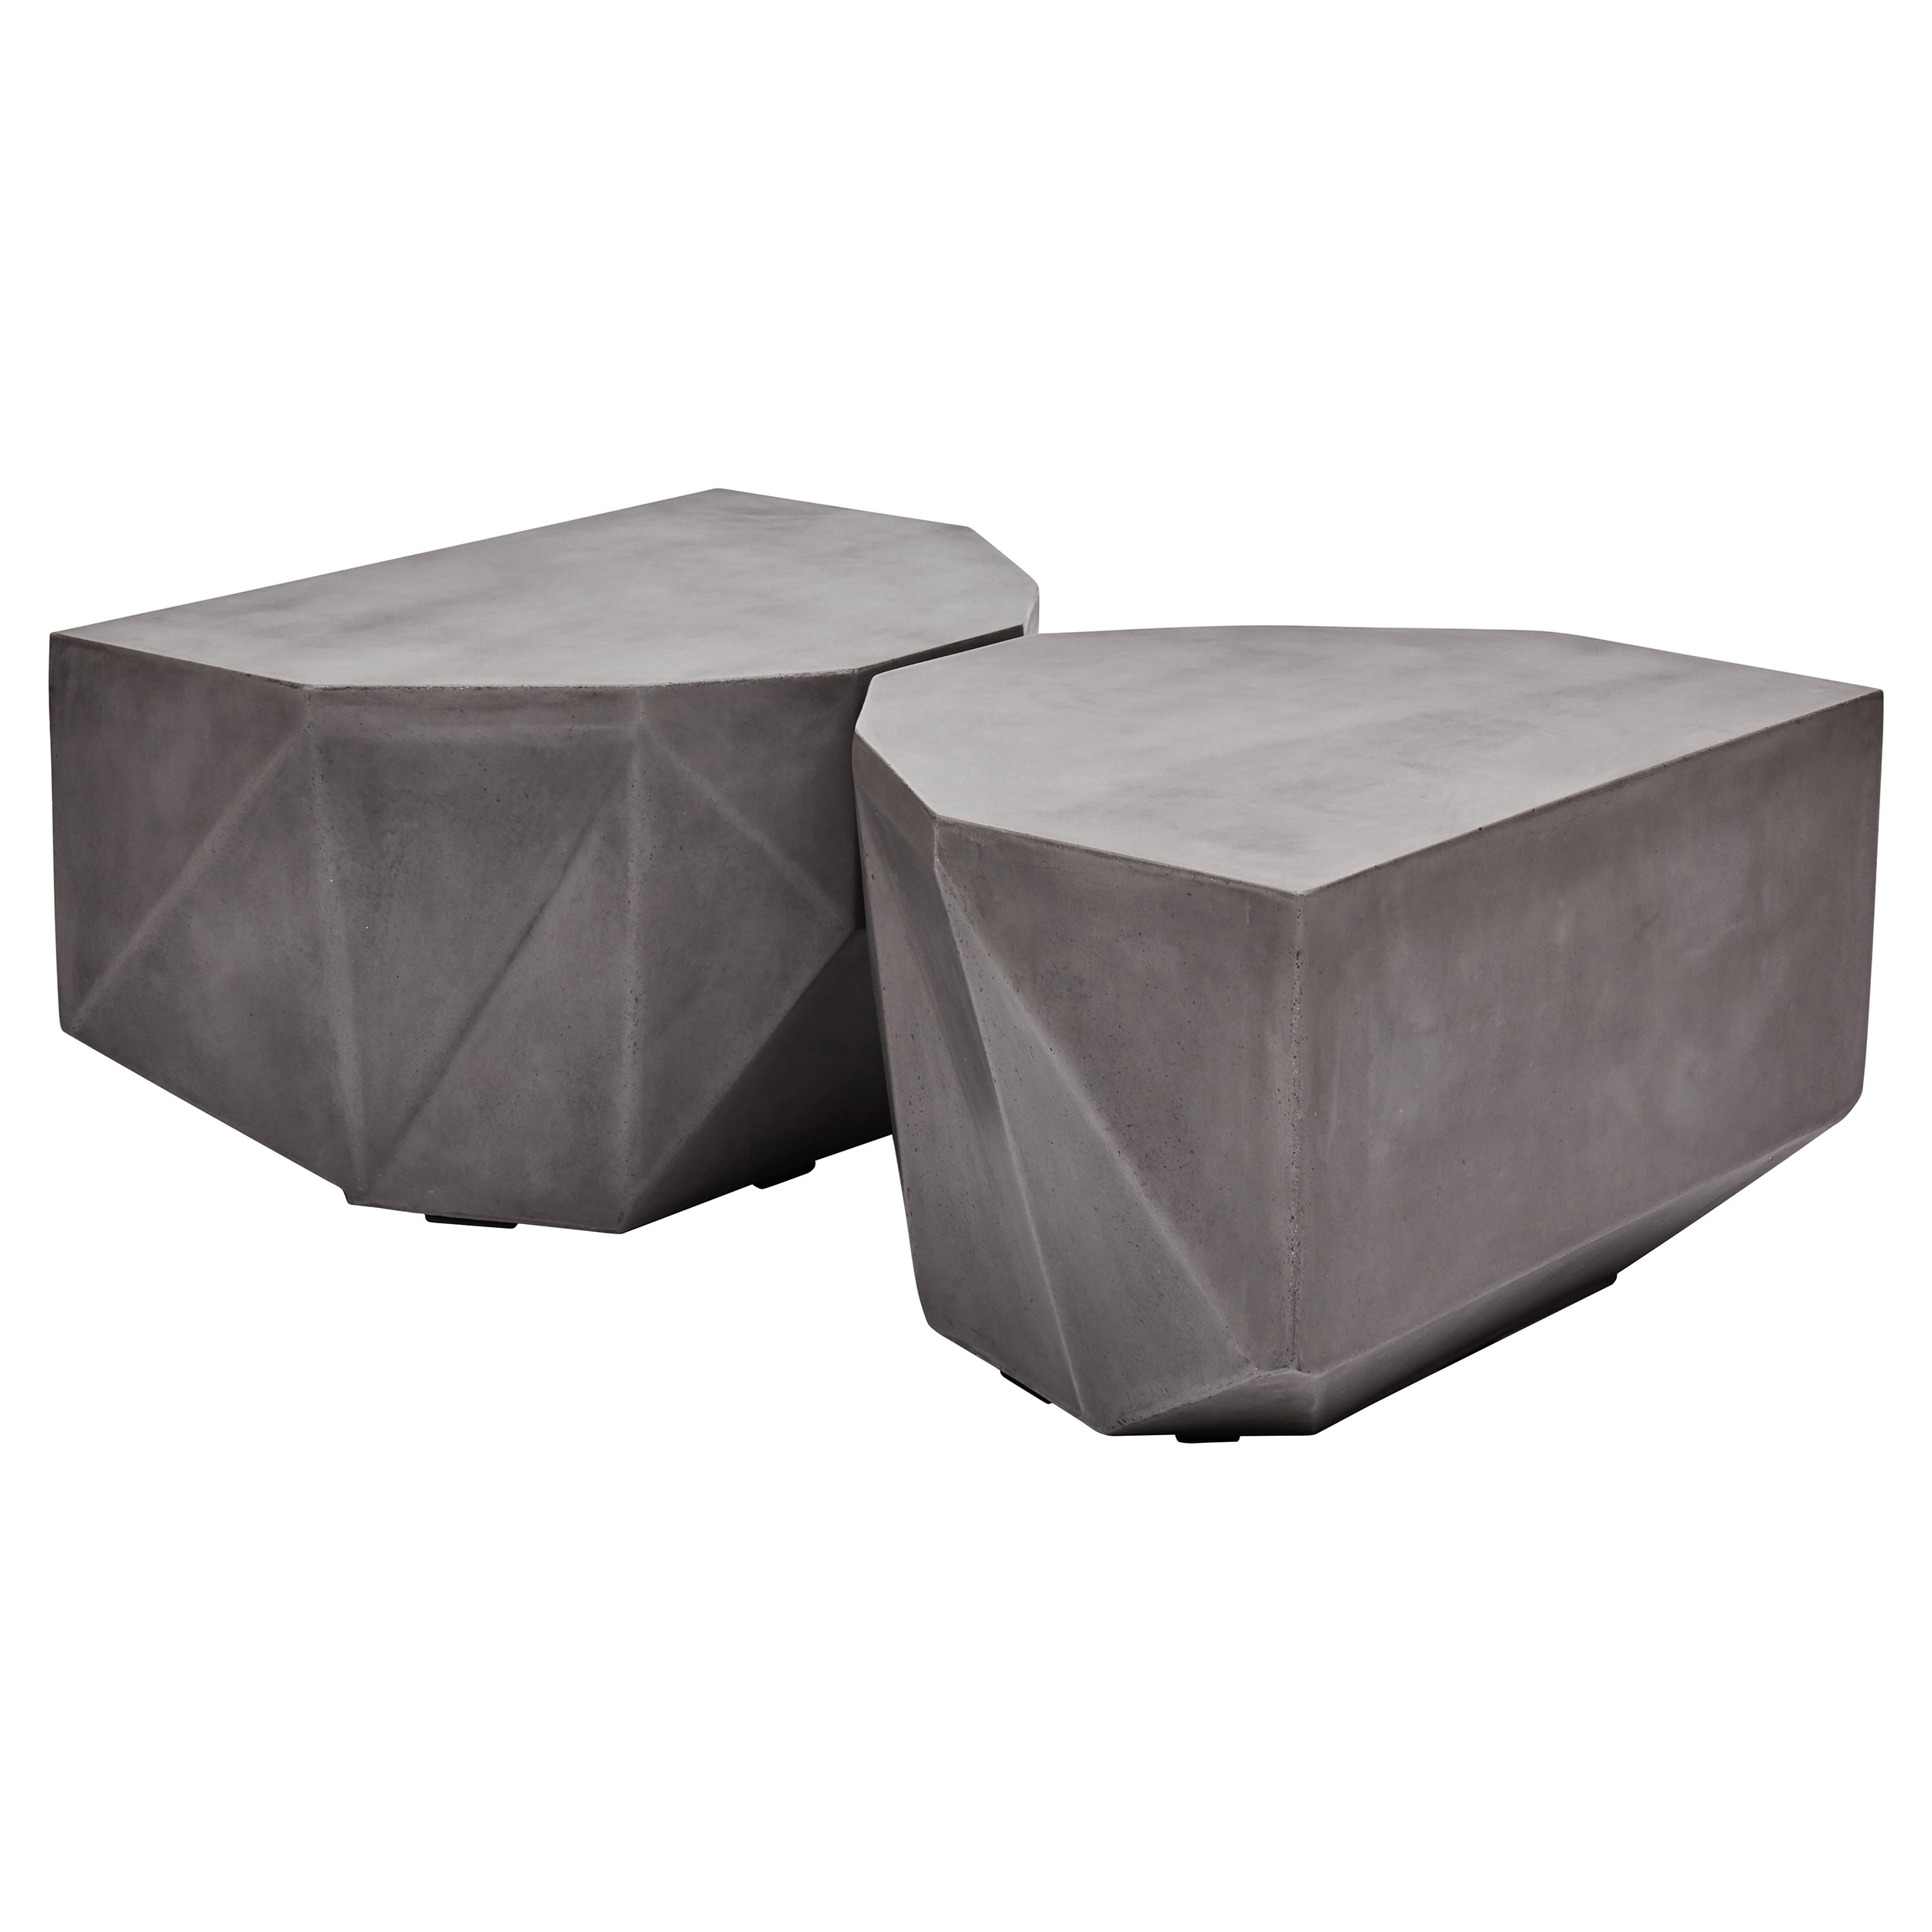 Lily Modern Classic Dark Grey Geometric Outdoor Coffee Table - Set of 2 - Image 3